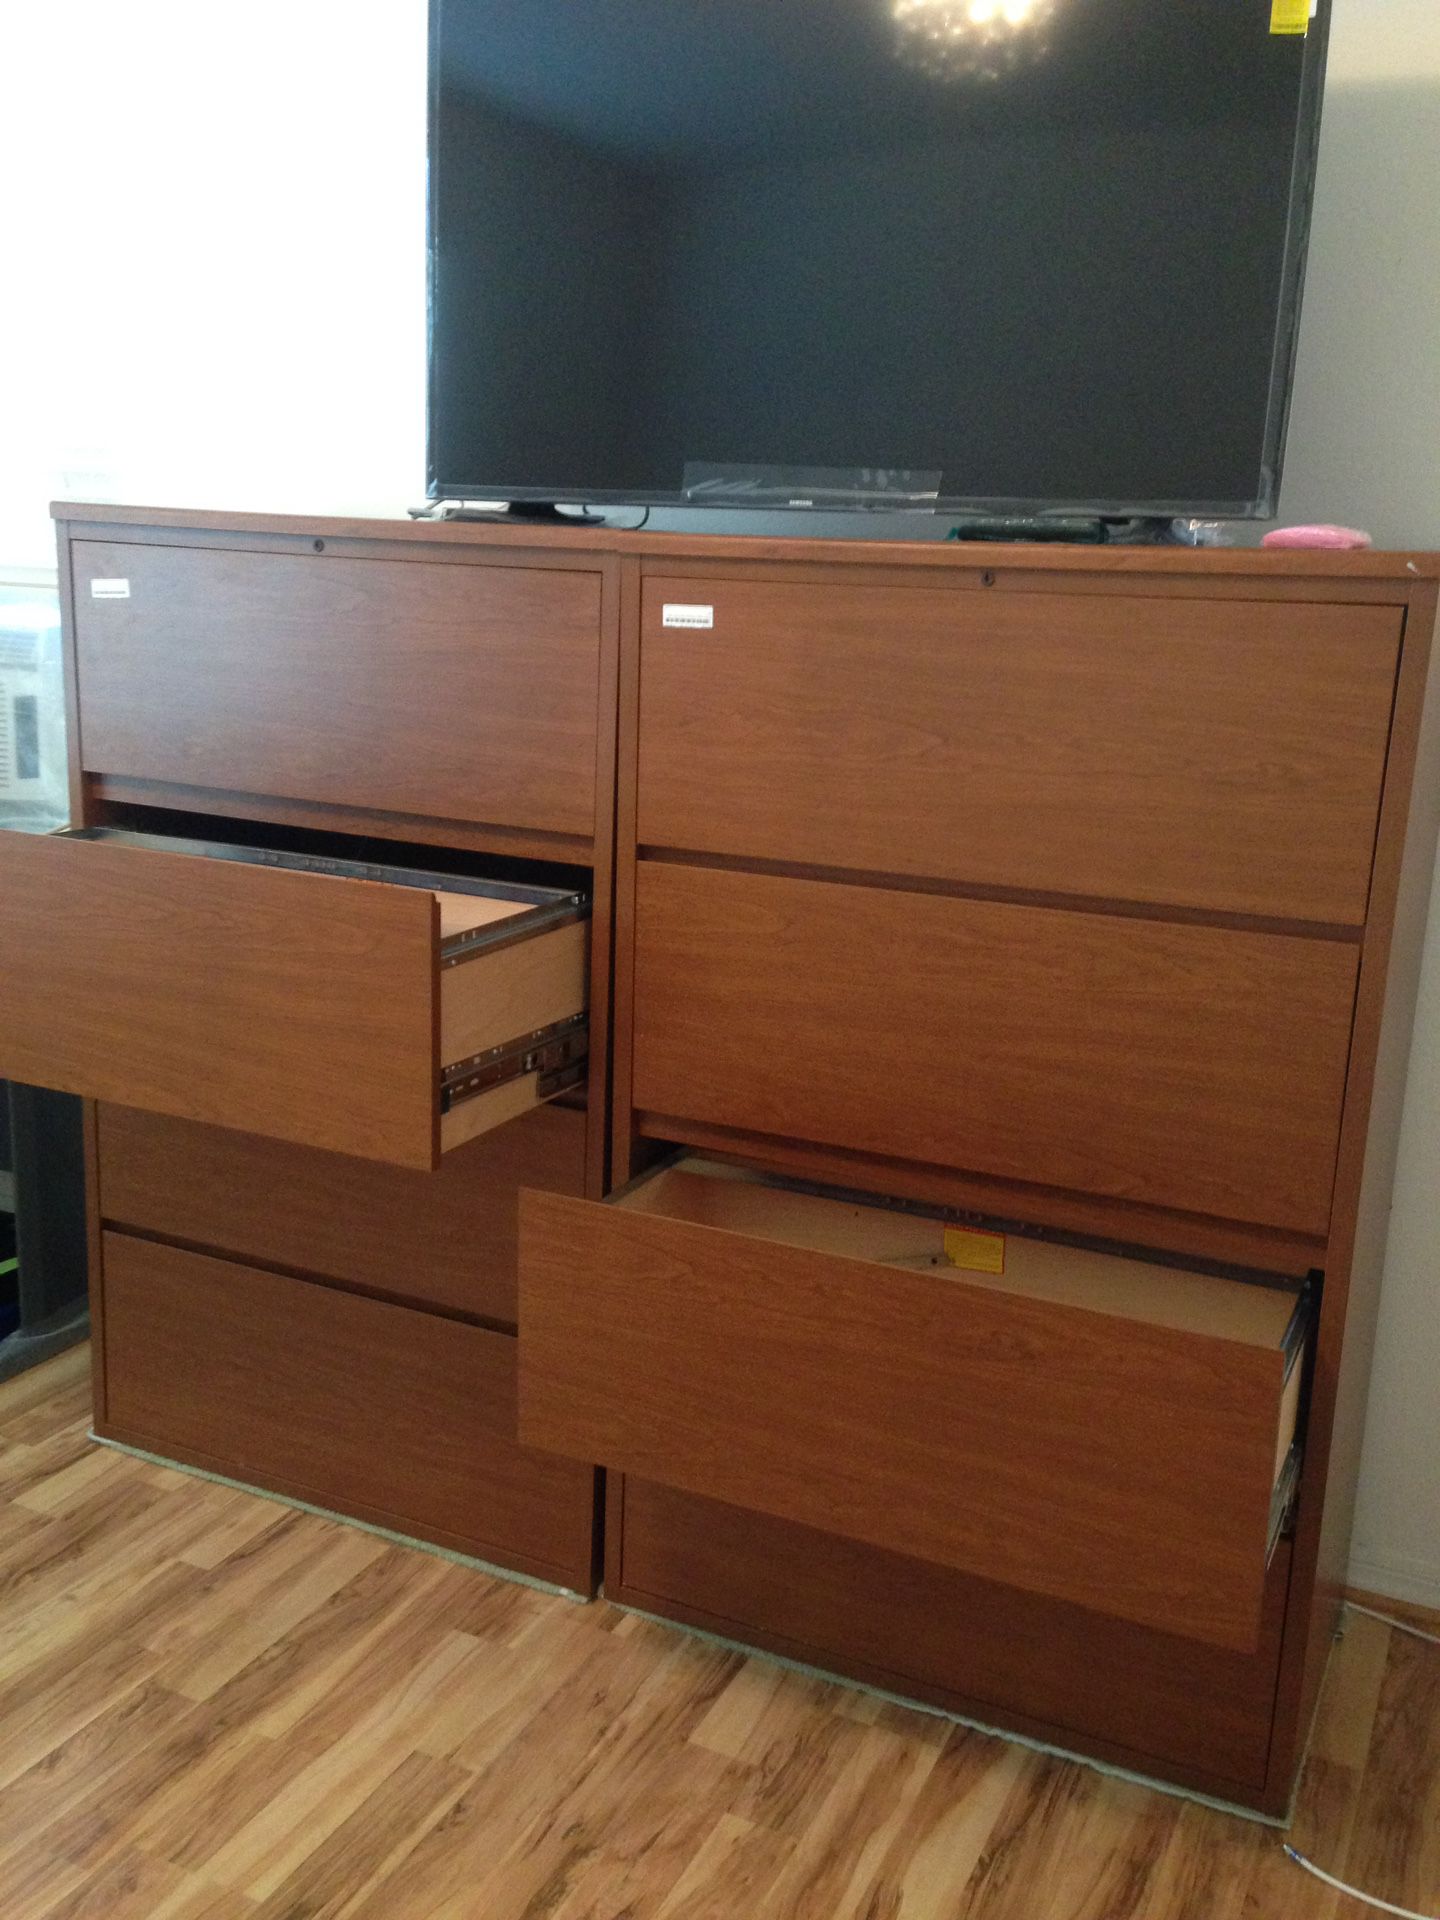 Two (4) Drawer Wooden Lateral File Cabinets 